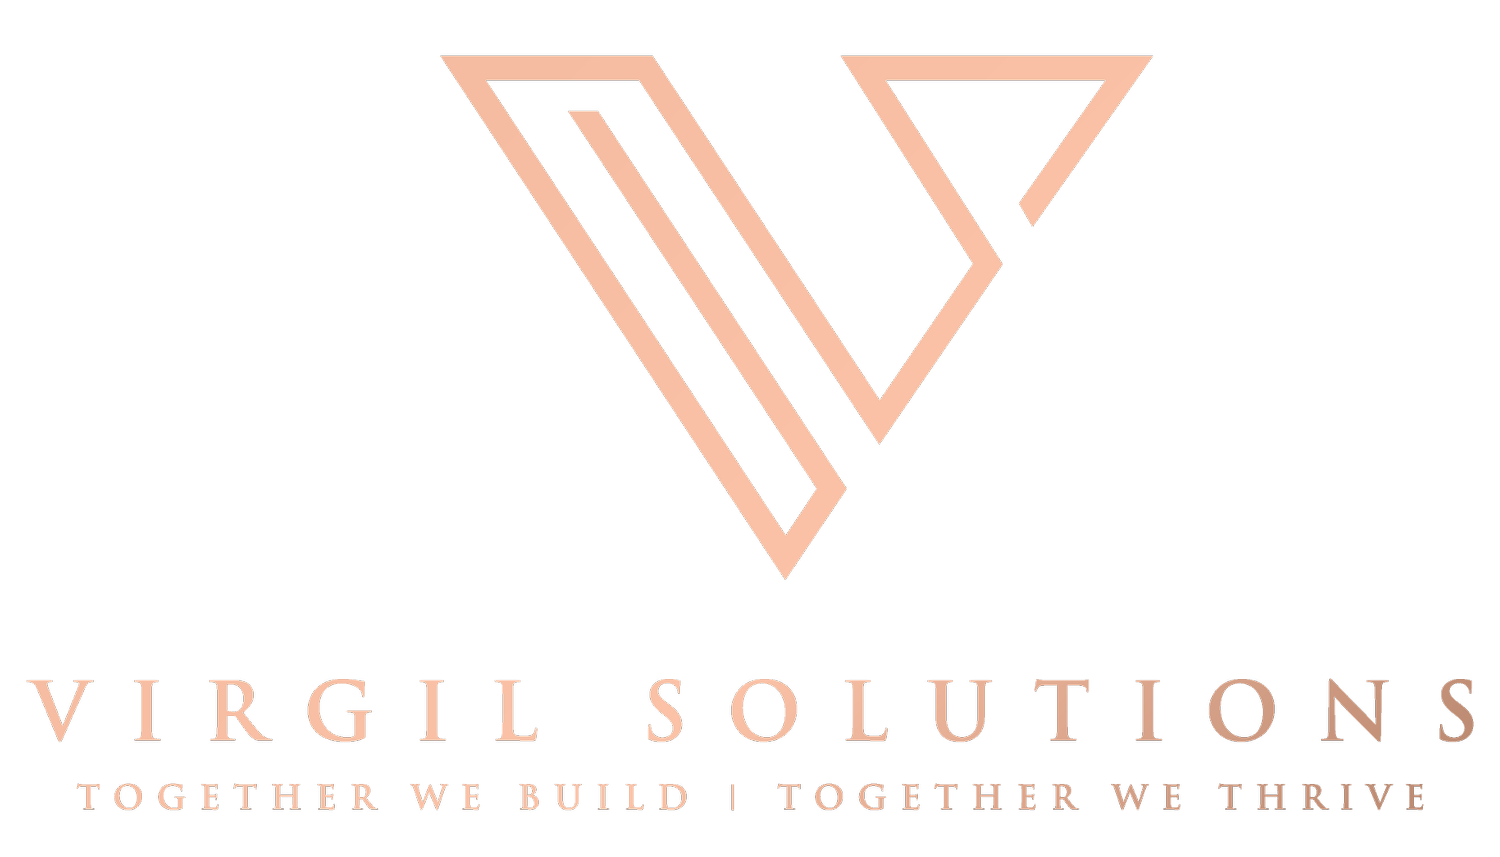 Welcome to Virgil Solutions